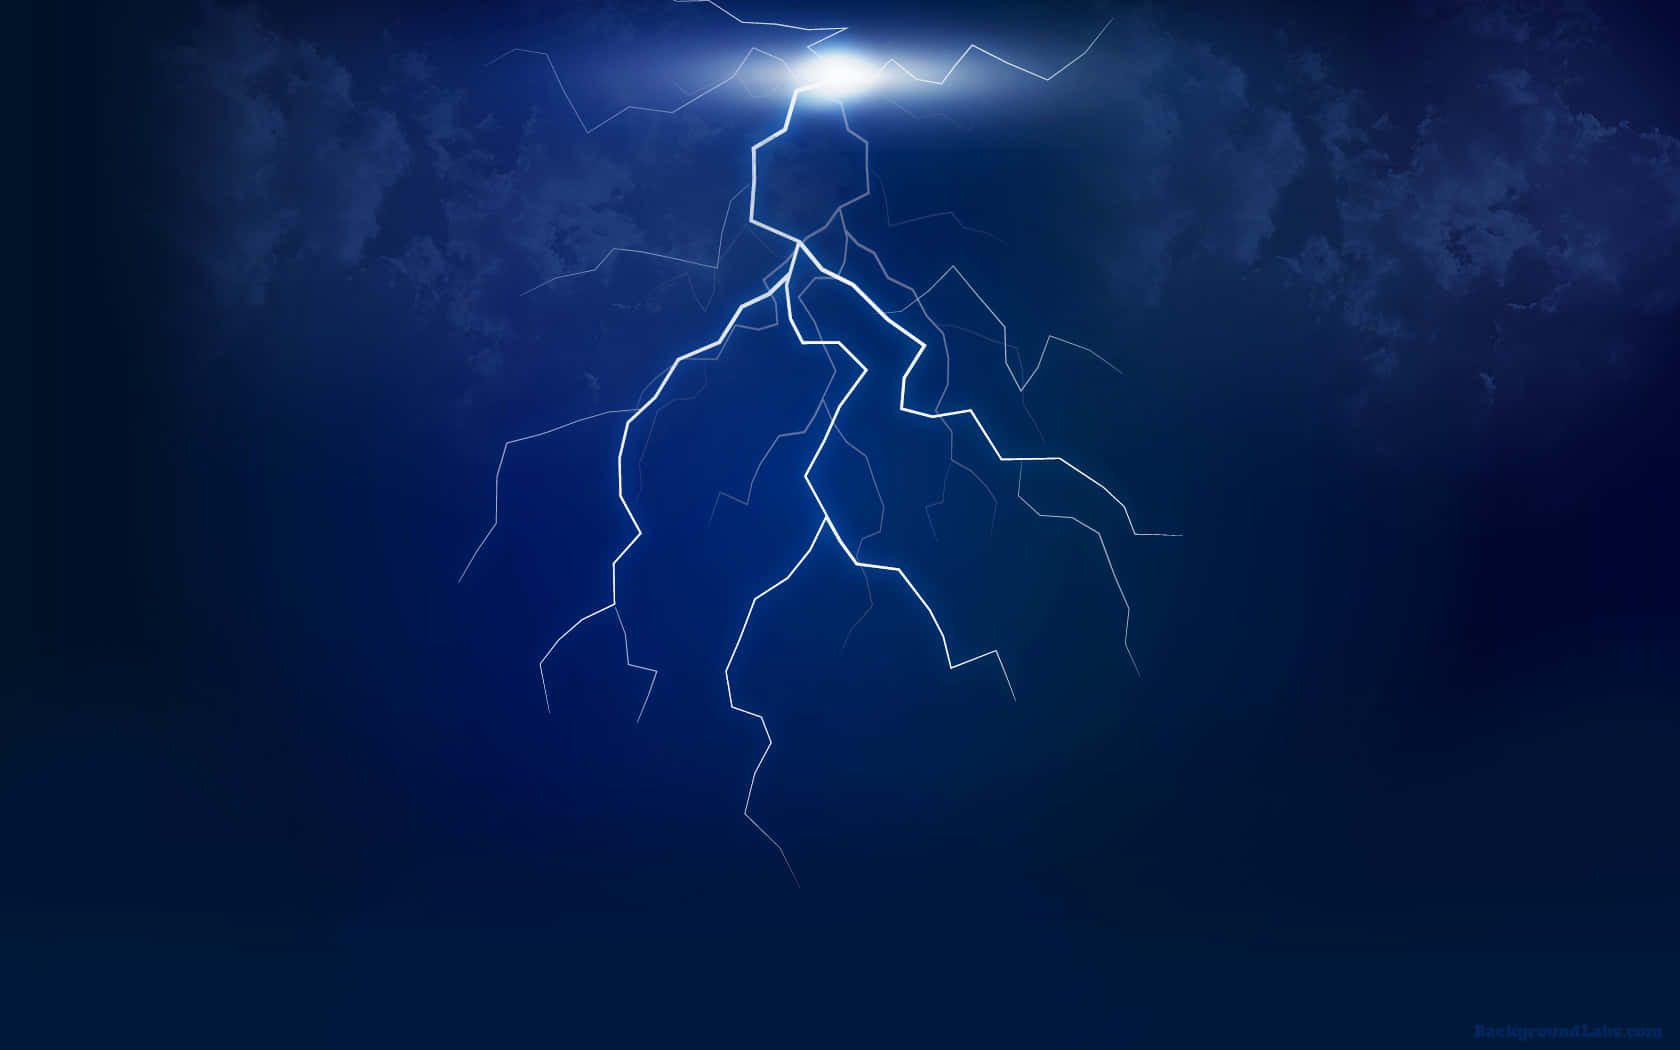 An illuminating discharge of electricity appearing as bright flashes during a thunderstorm